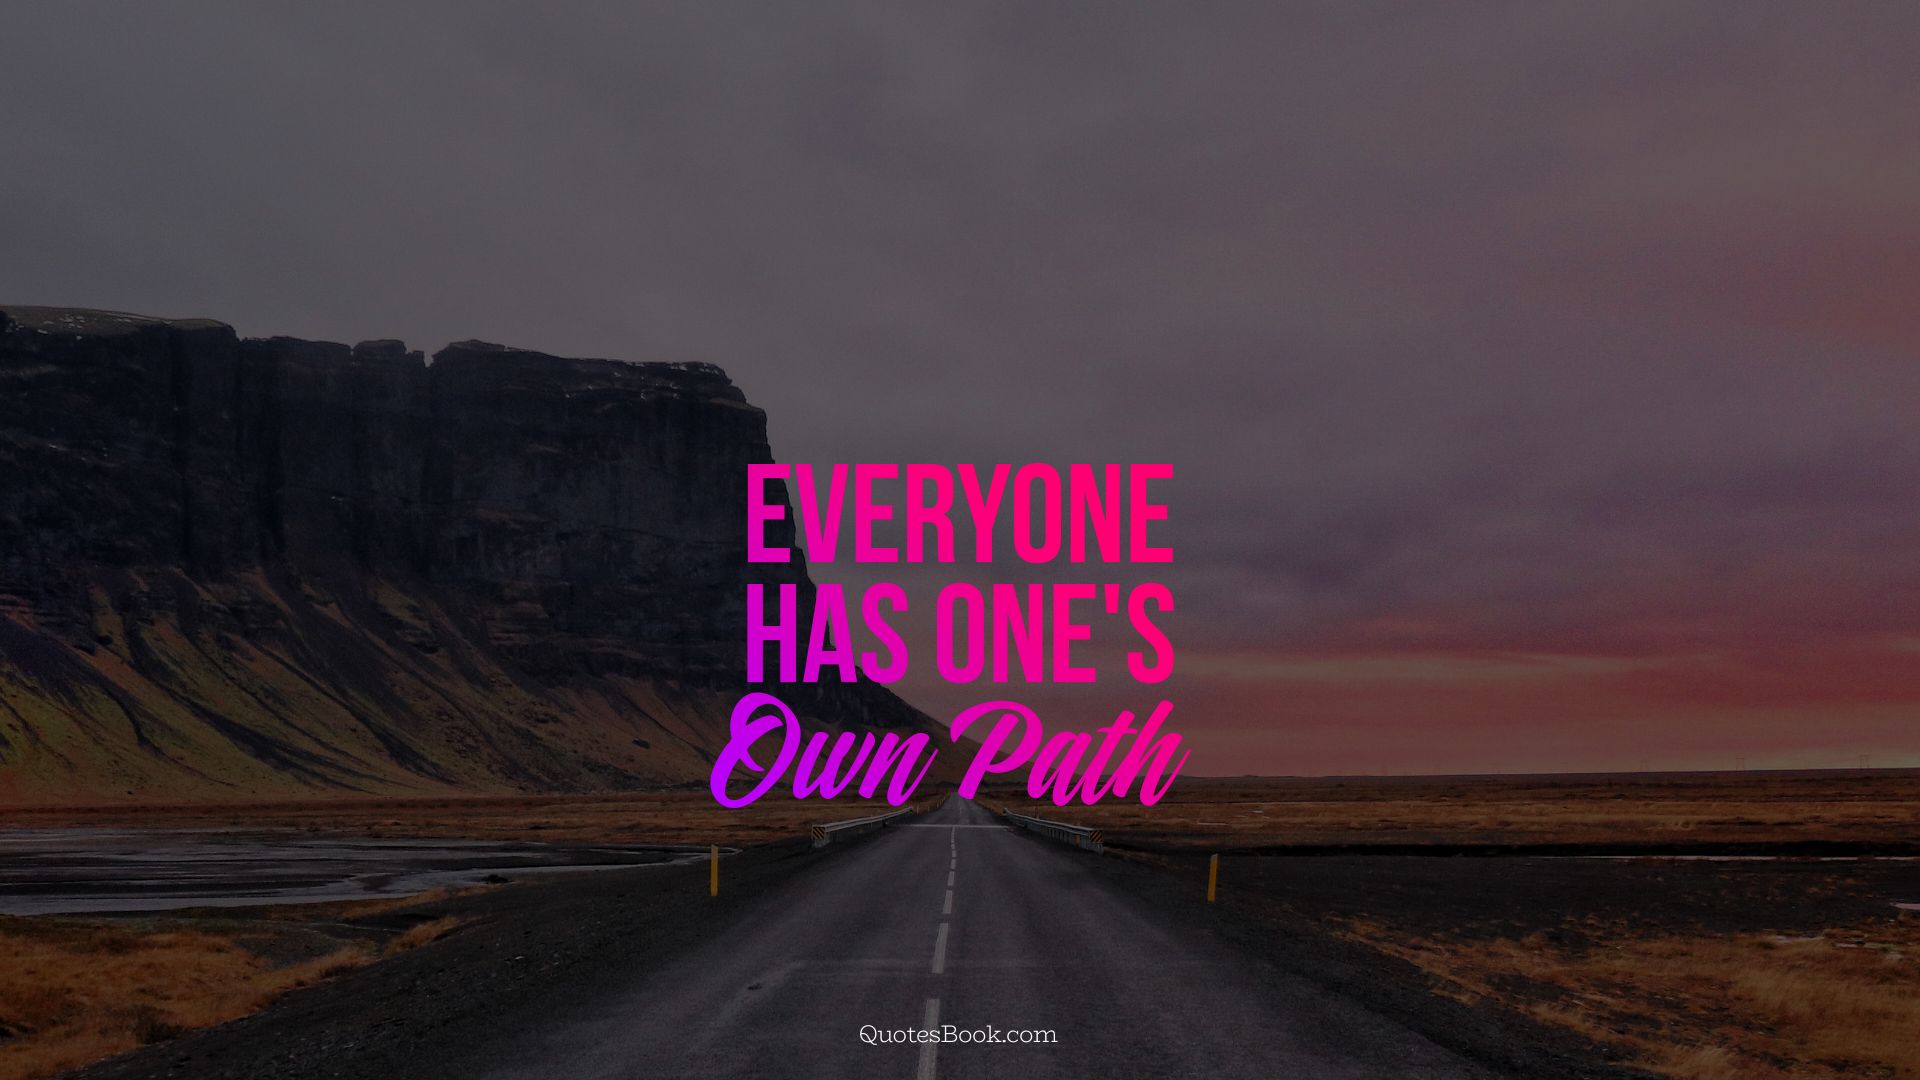 Everyone has one's own path